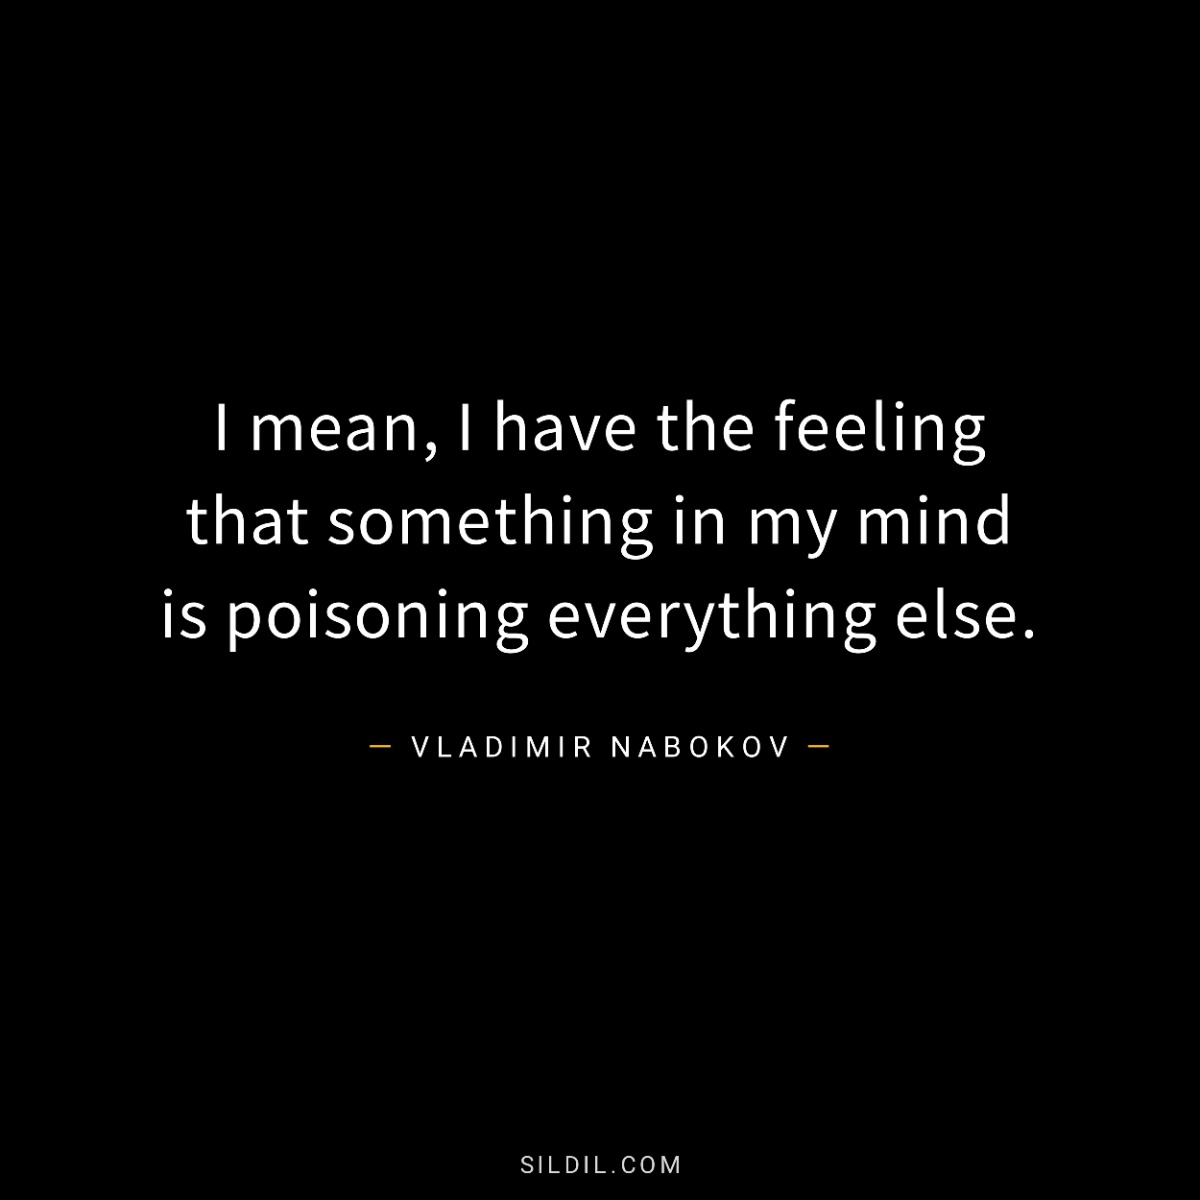 I mean, I have the feeling that something in my mind is poisoning everything else.